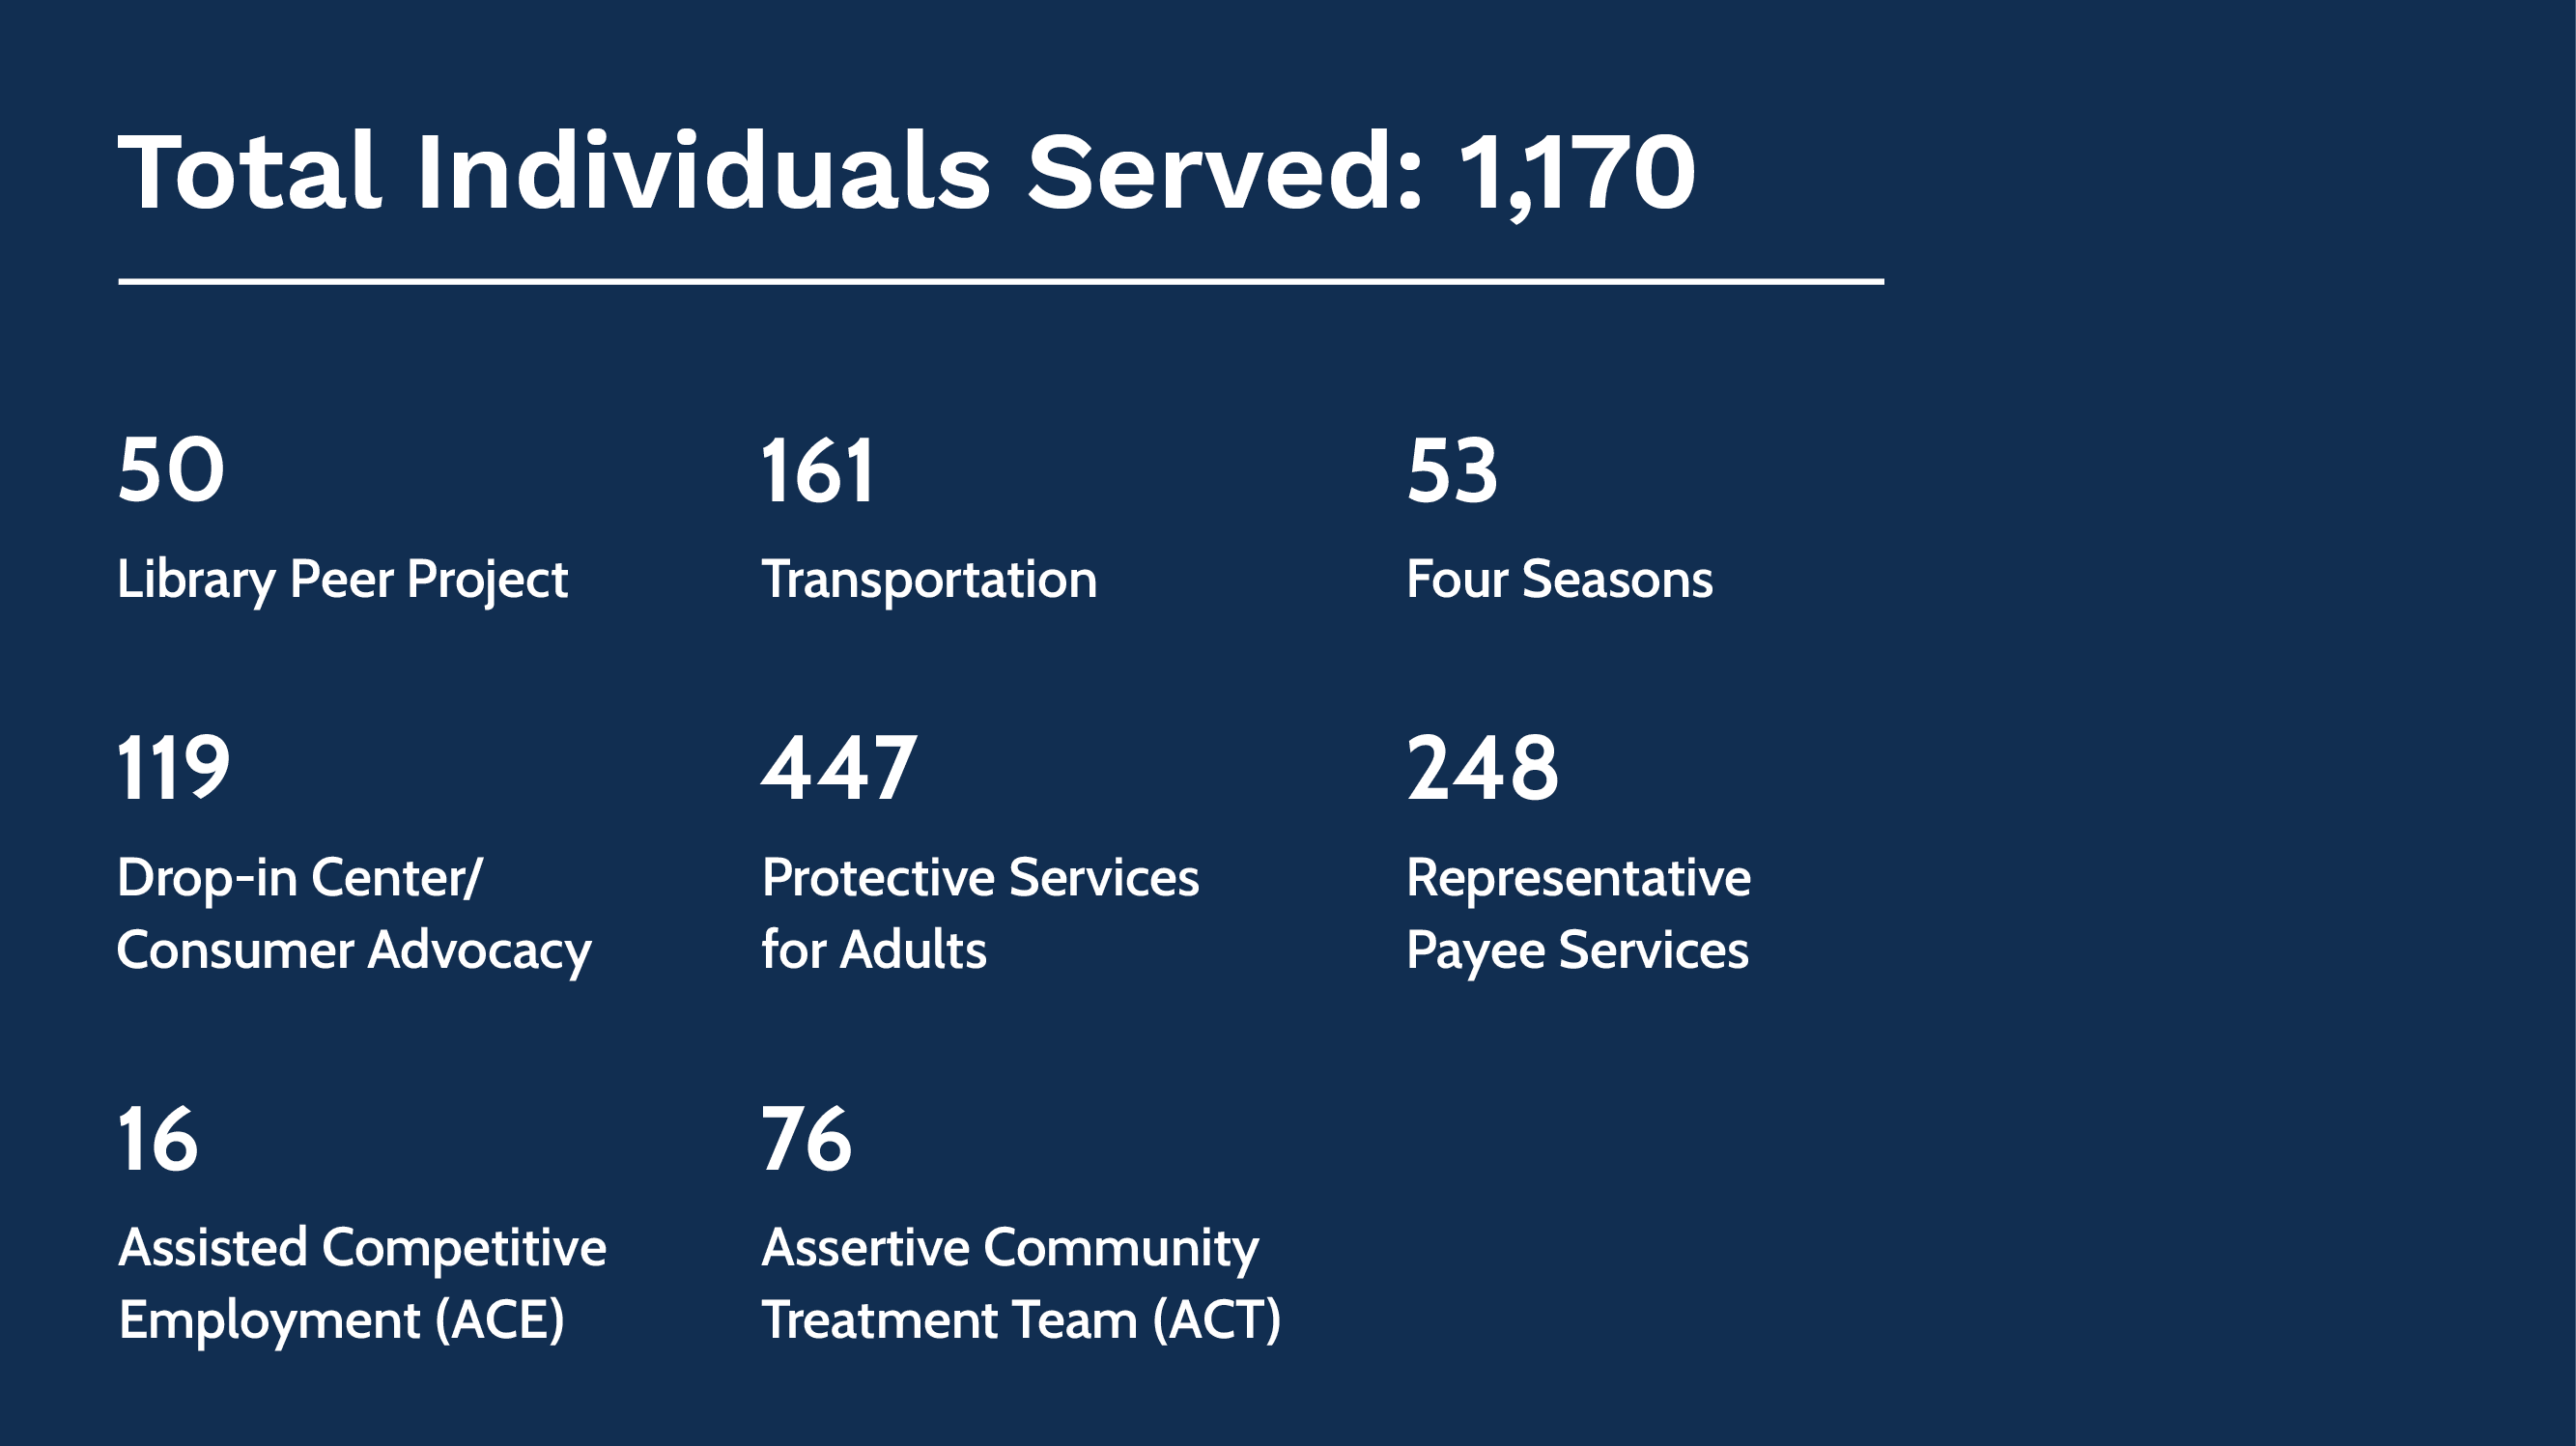 Mental Health Services total served = 1,170; Library Peer Project = 50; Transportation = 161; Four Seasons = 53; Drop-in Center/Consumer Advocacy = 119; Protective Services for Adults = 447; Representative Payee Services = 248; Assisted Competitive Employ